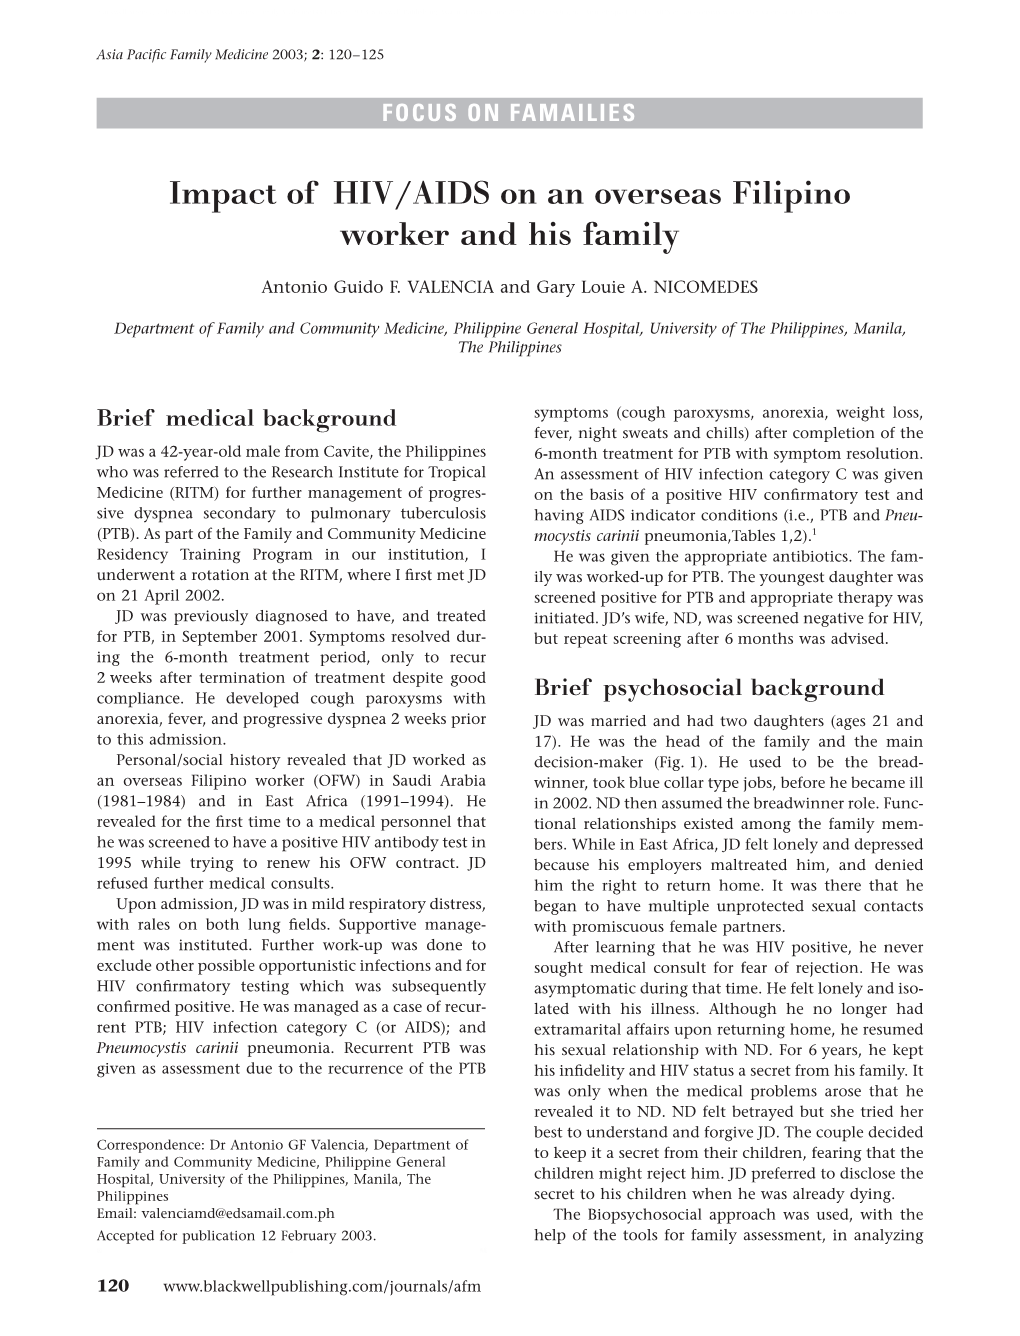 Impact of HIV/AIDS on an Overseas Filipino Worker and His Family